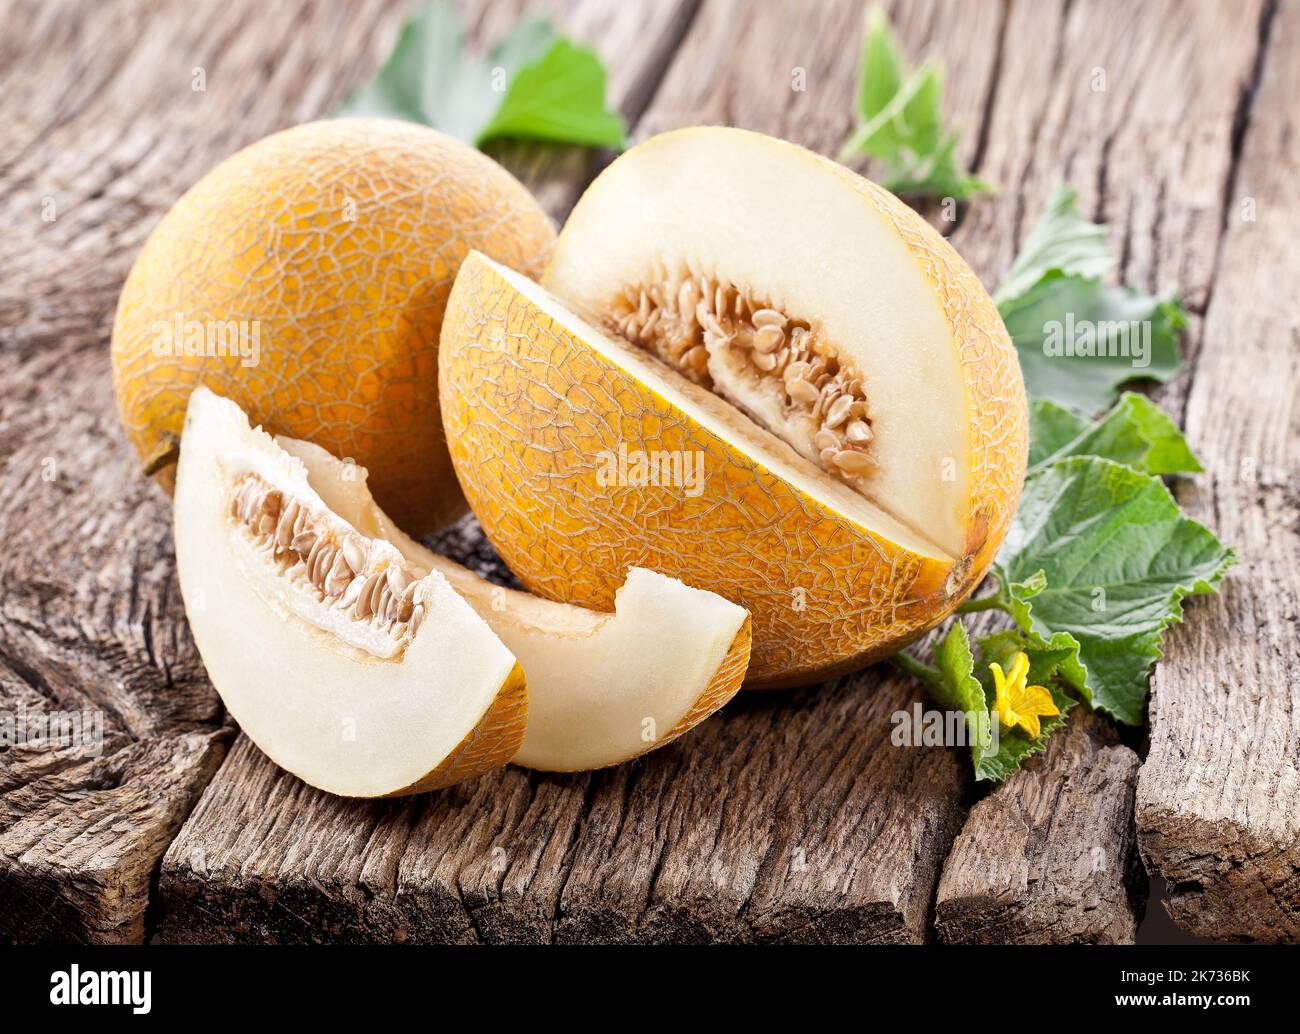 Cantaloupe melon with leaf and melon slice on old wooden table. Stock Photo